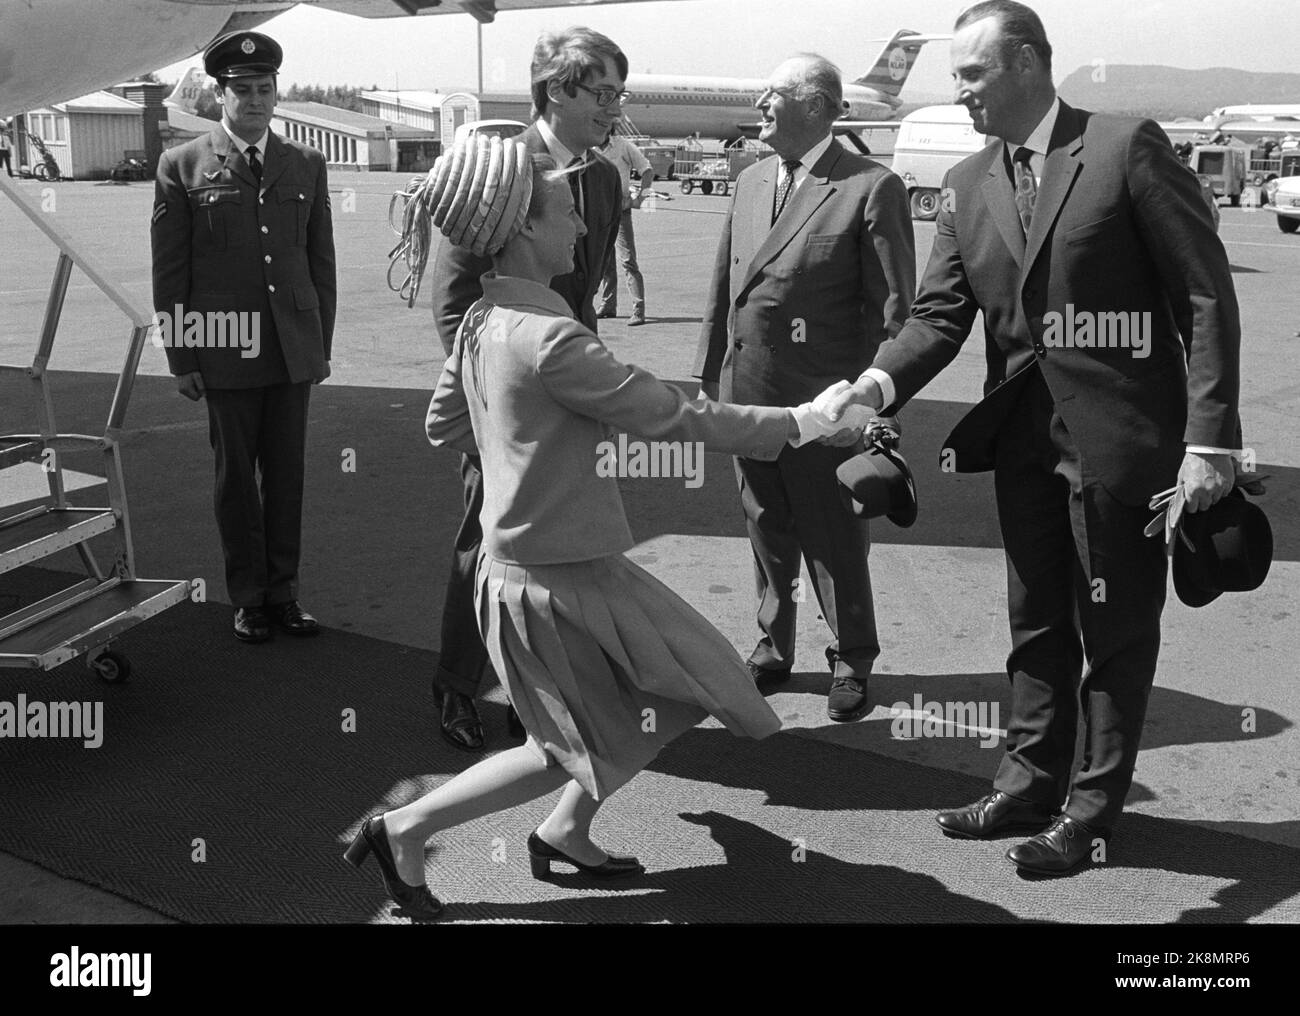 Fornebu July 1, 1973. King Olav turns 70 on July 2, 1973. Here he and Crown Prince Harald welcome royal guests, the princess of Gloucester and Prince Richard, at Fornebu. Picture series, No. 7 out of 11. Photo; Current / NTB Stock Photo